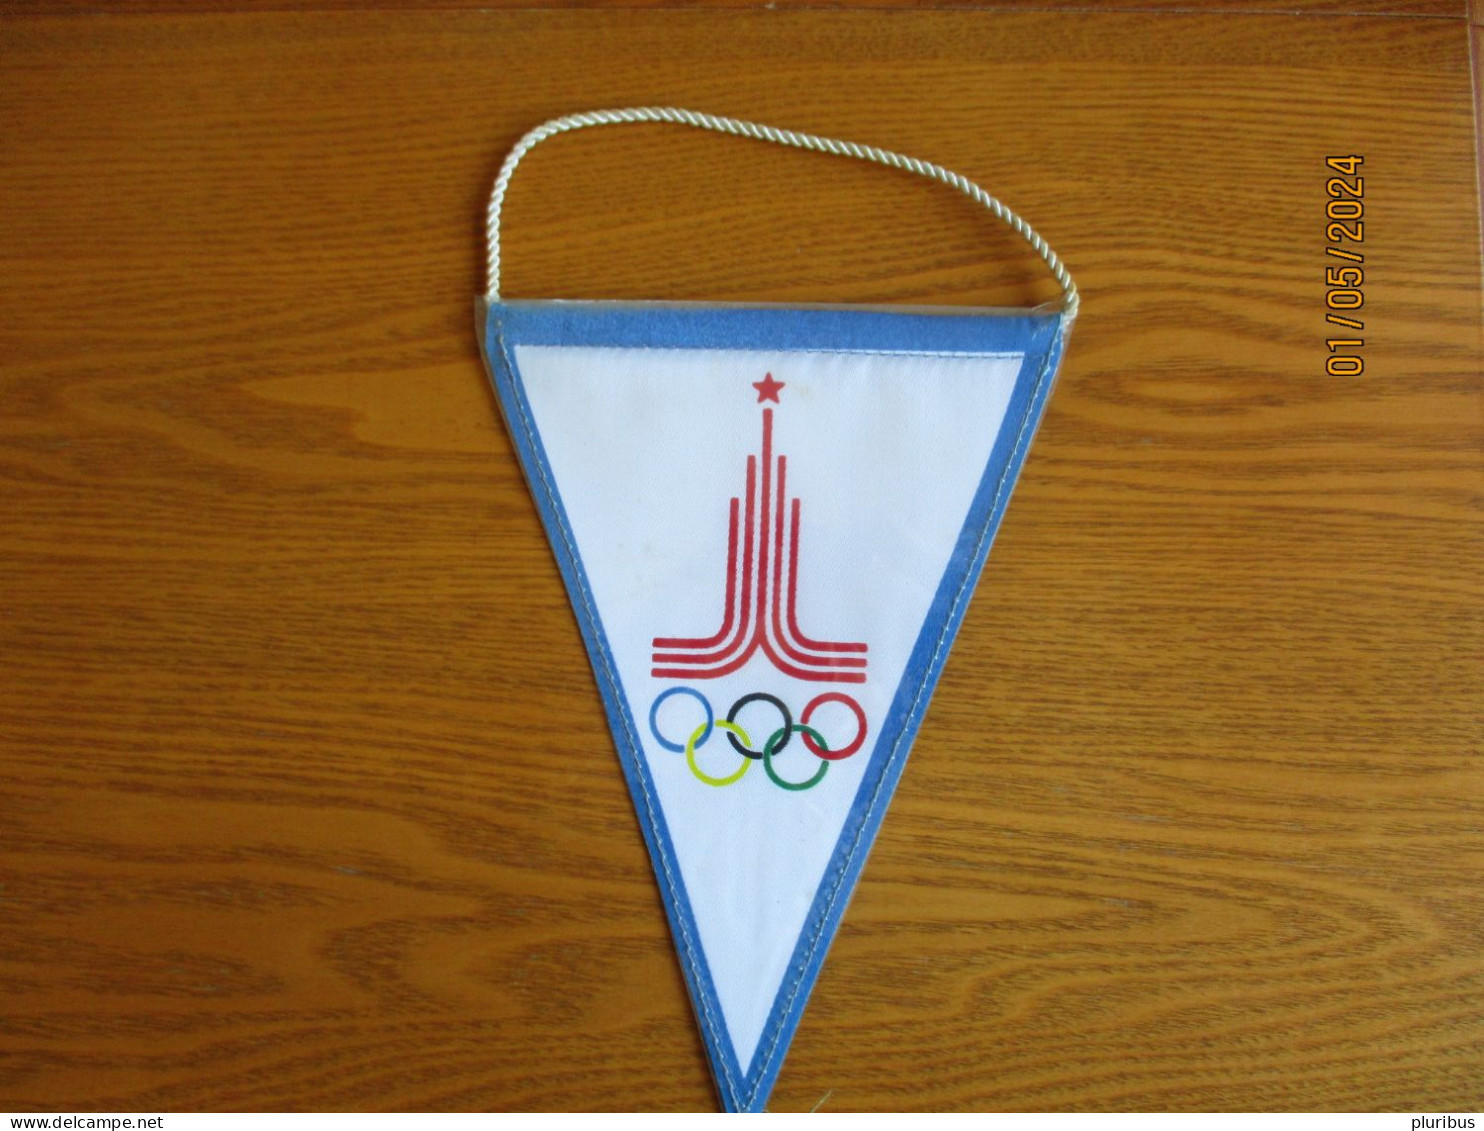 RUSSIA USSR 1980 MOSCOW OLYMPICS PENNANT - Bekleidung, Souvenirs Und Sonstige